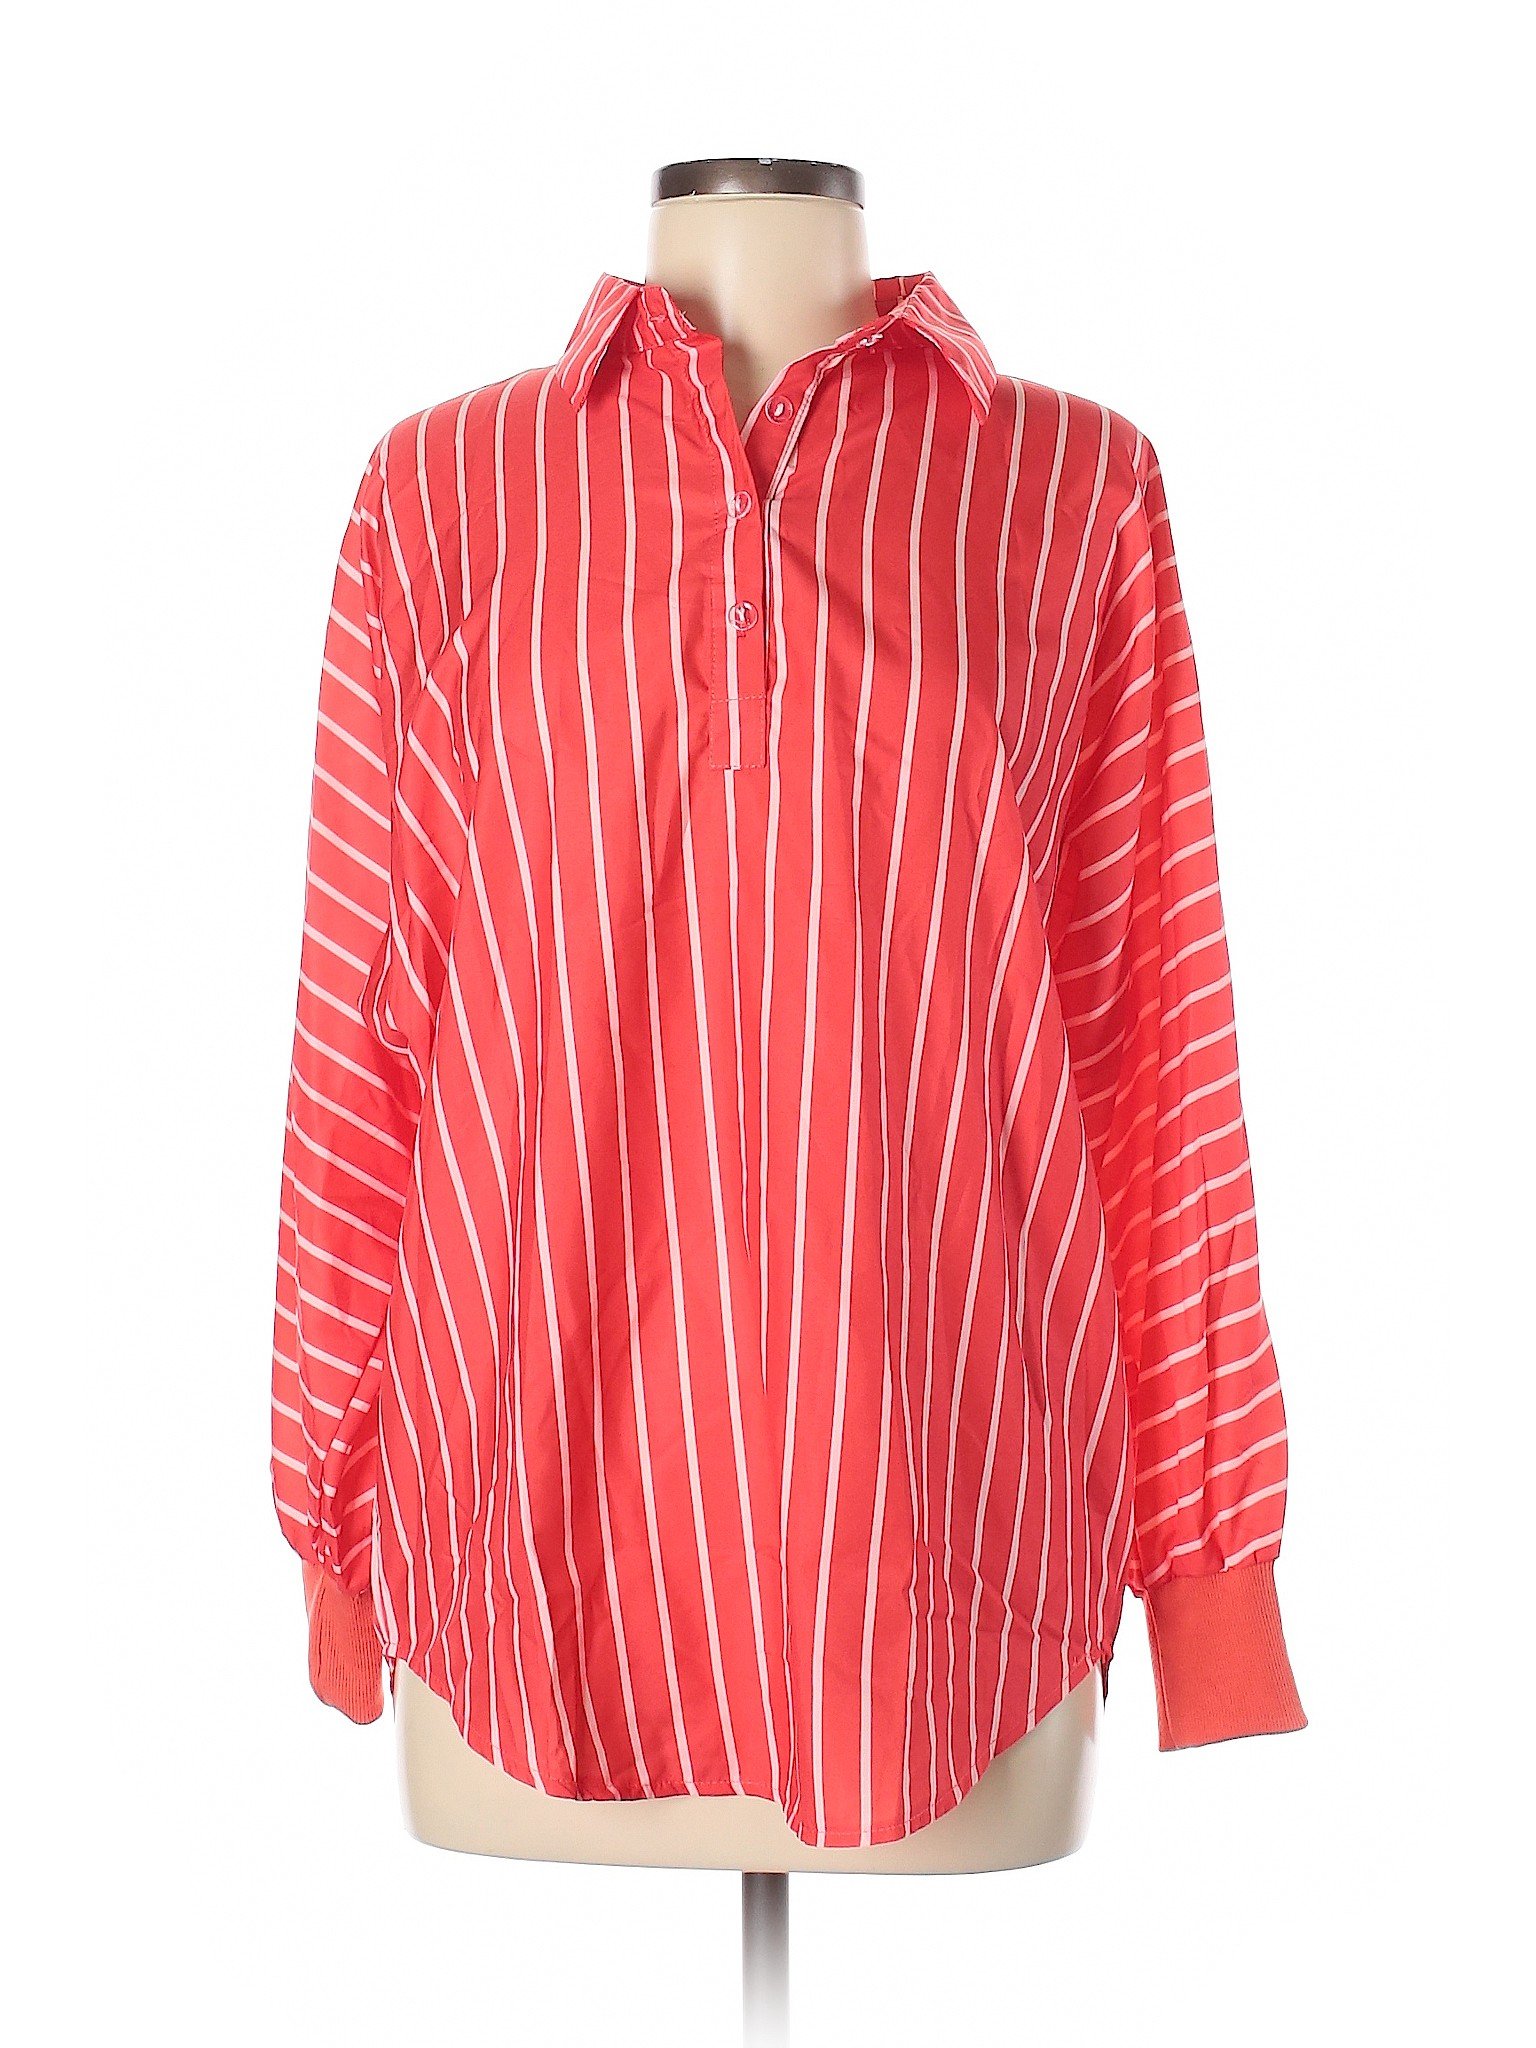 Misslook Stripes Red Long Sleeve Blouse Size M - 92% off | thredUP